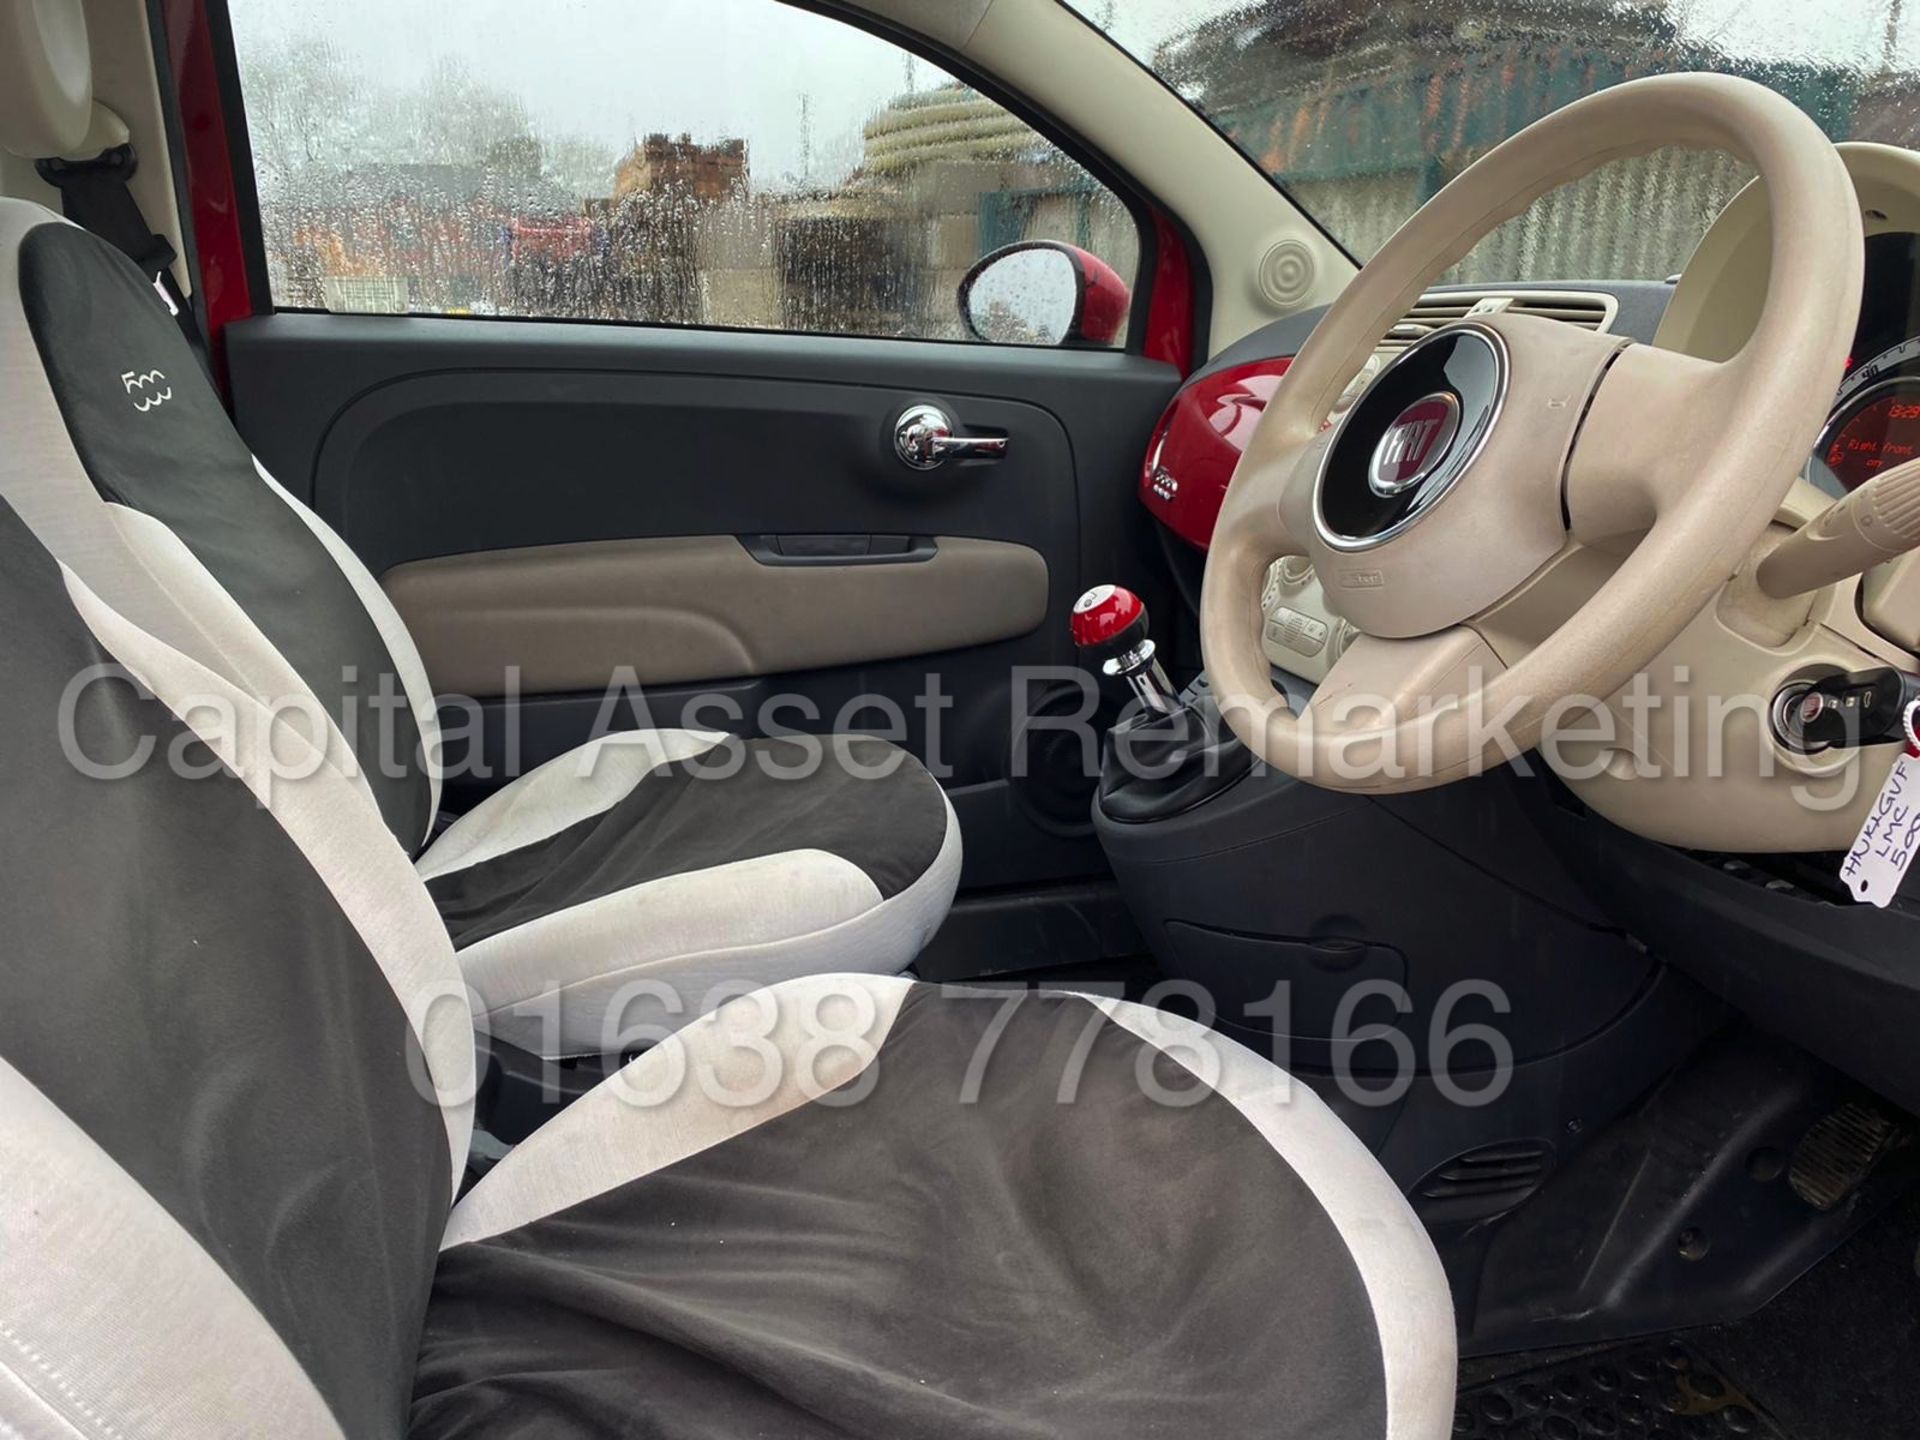 (On Sale) FIAT 500 *COLOUR THERAPY - EDITION* (2014) '1.2 PETROL - 5 SPEED' *AIR CON* (NO VAT) - Image 10 of 15